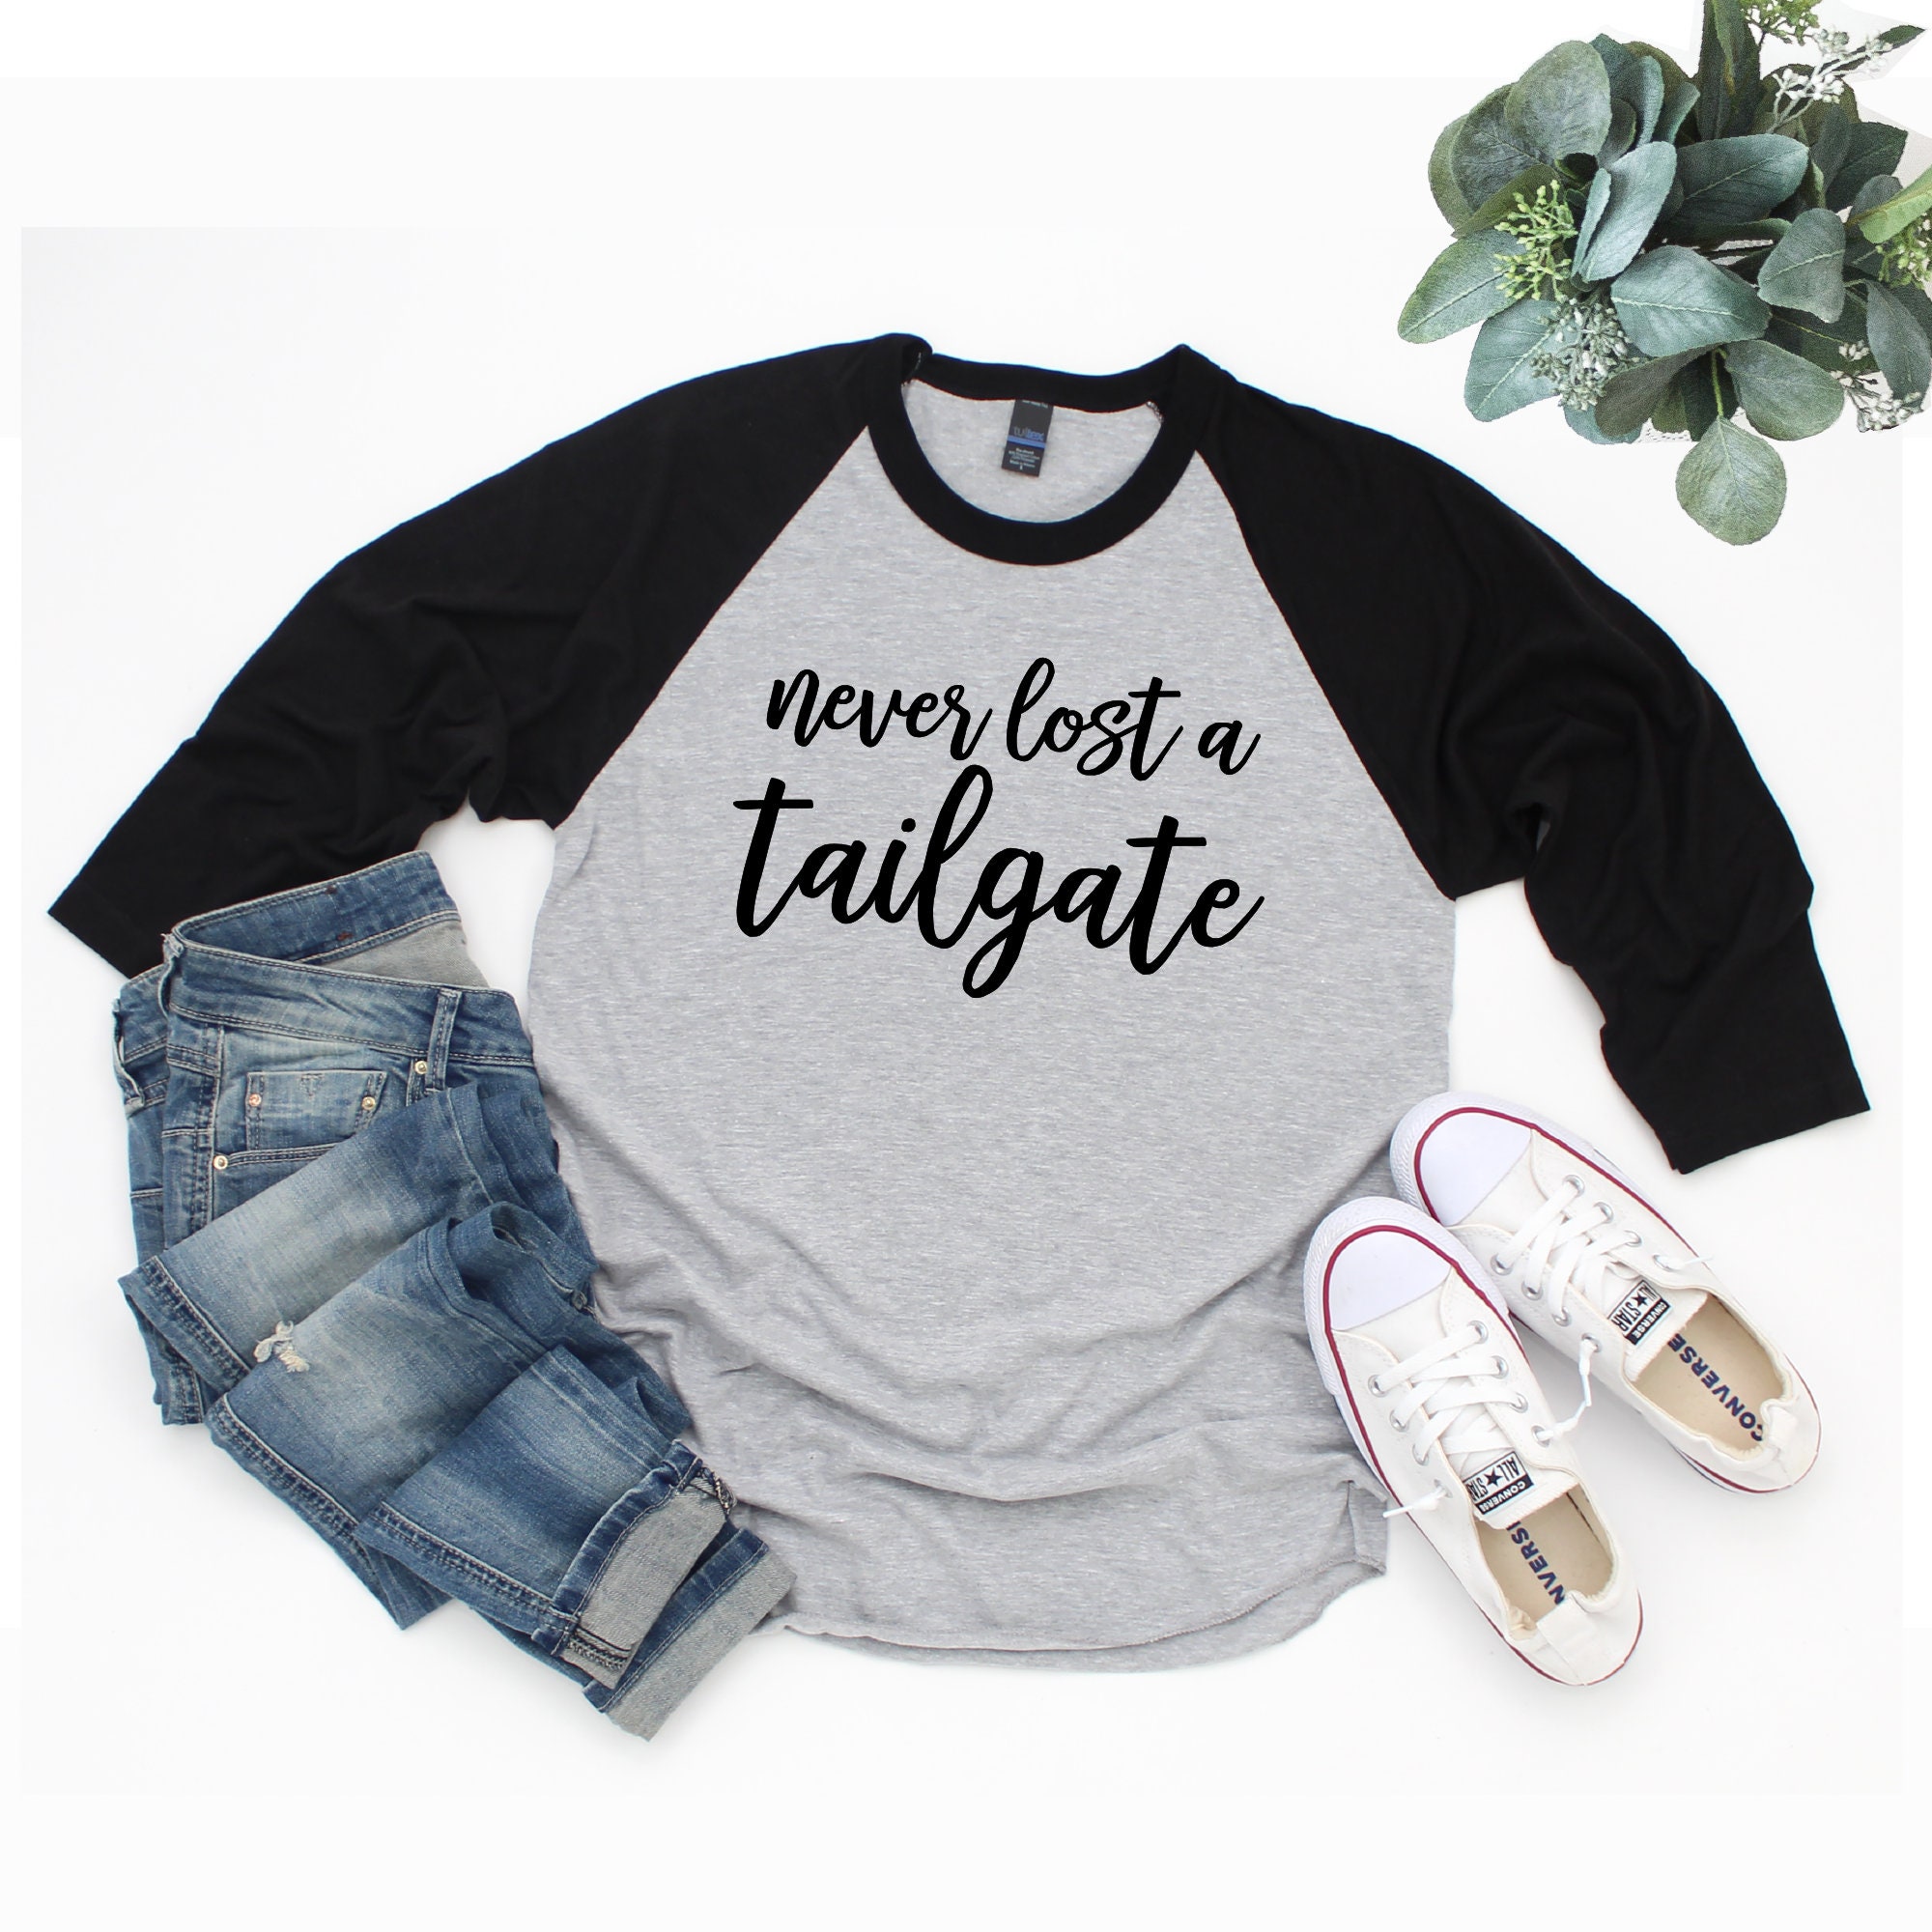  Retro Vintage Hurricane Party Look Tailgate Gameday Fan Gift  Raglan Baseball Tee : Clothing, Shoes & Jewelry